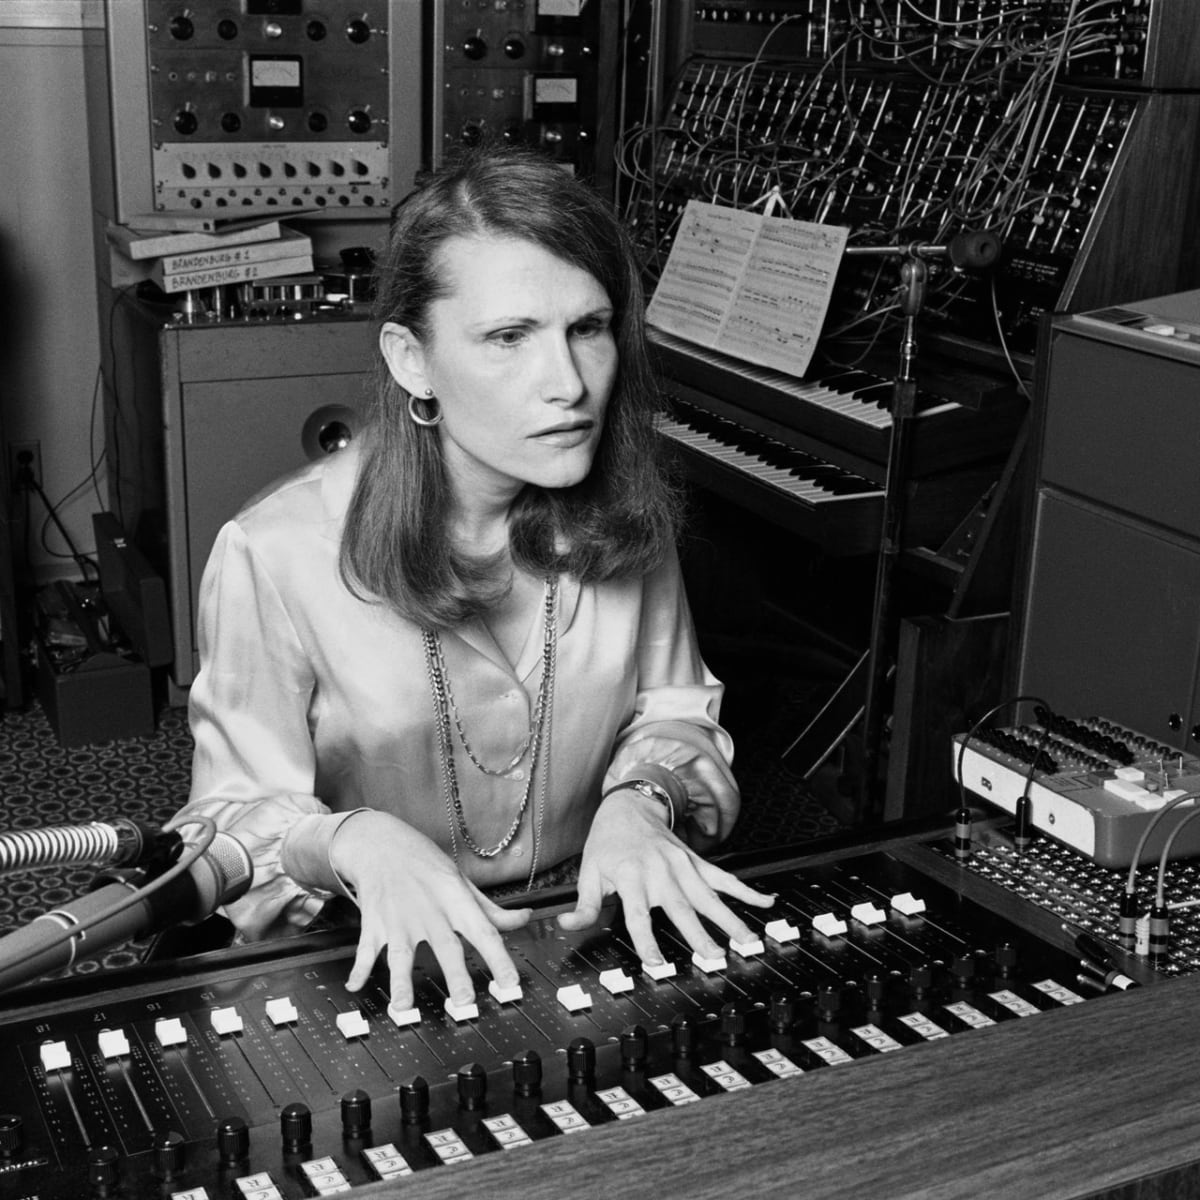 Love the appreciation for Kim Petras, but she's not the first trans woman ever to win a Grammy, that's Wendy Carlos! 

Trans synth queen Carlos won 3 Grammys for 'Switched-On-Bach' in 1969. She later went on to compose the soundtracks for The Shining and A Clockwork Orange.